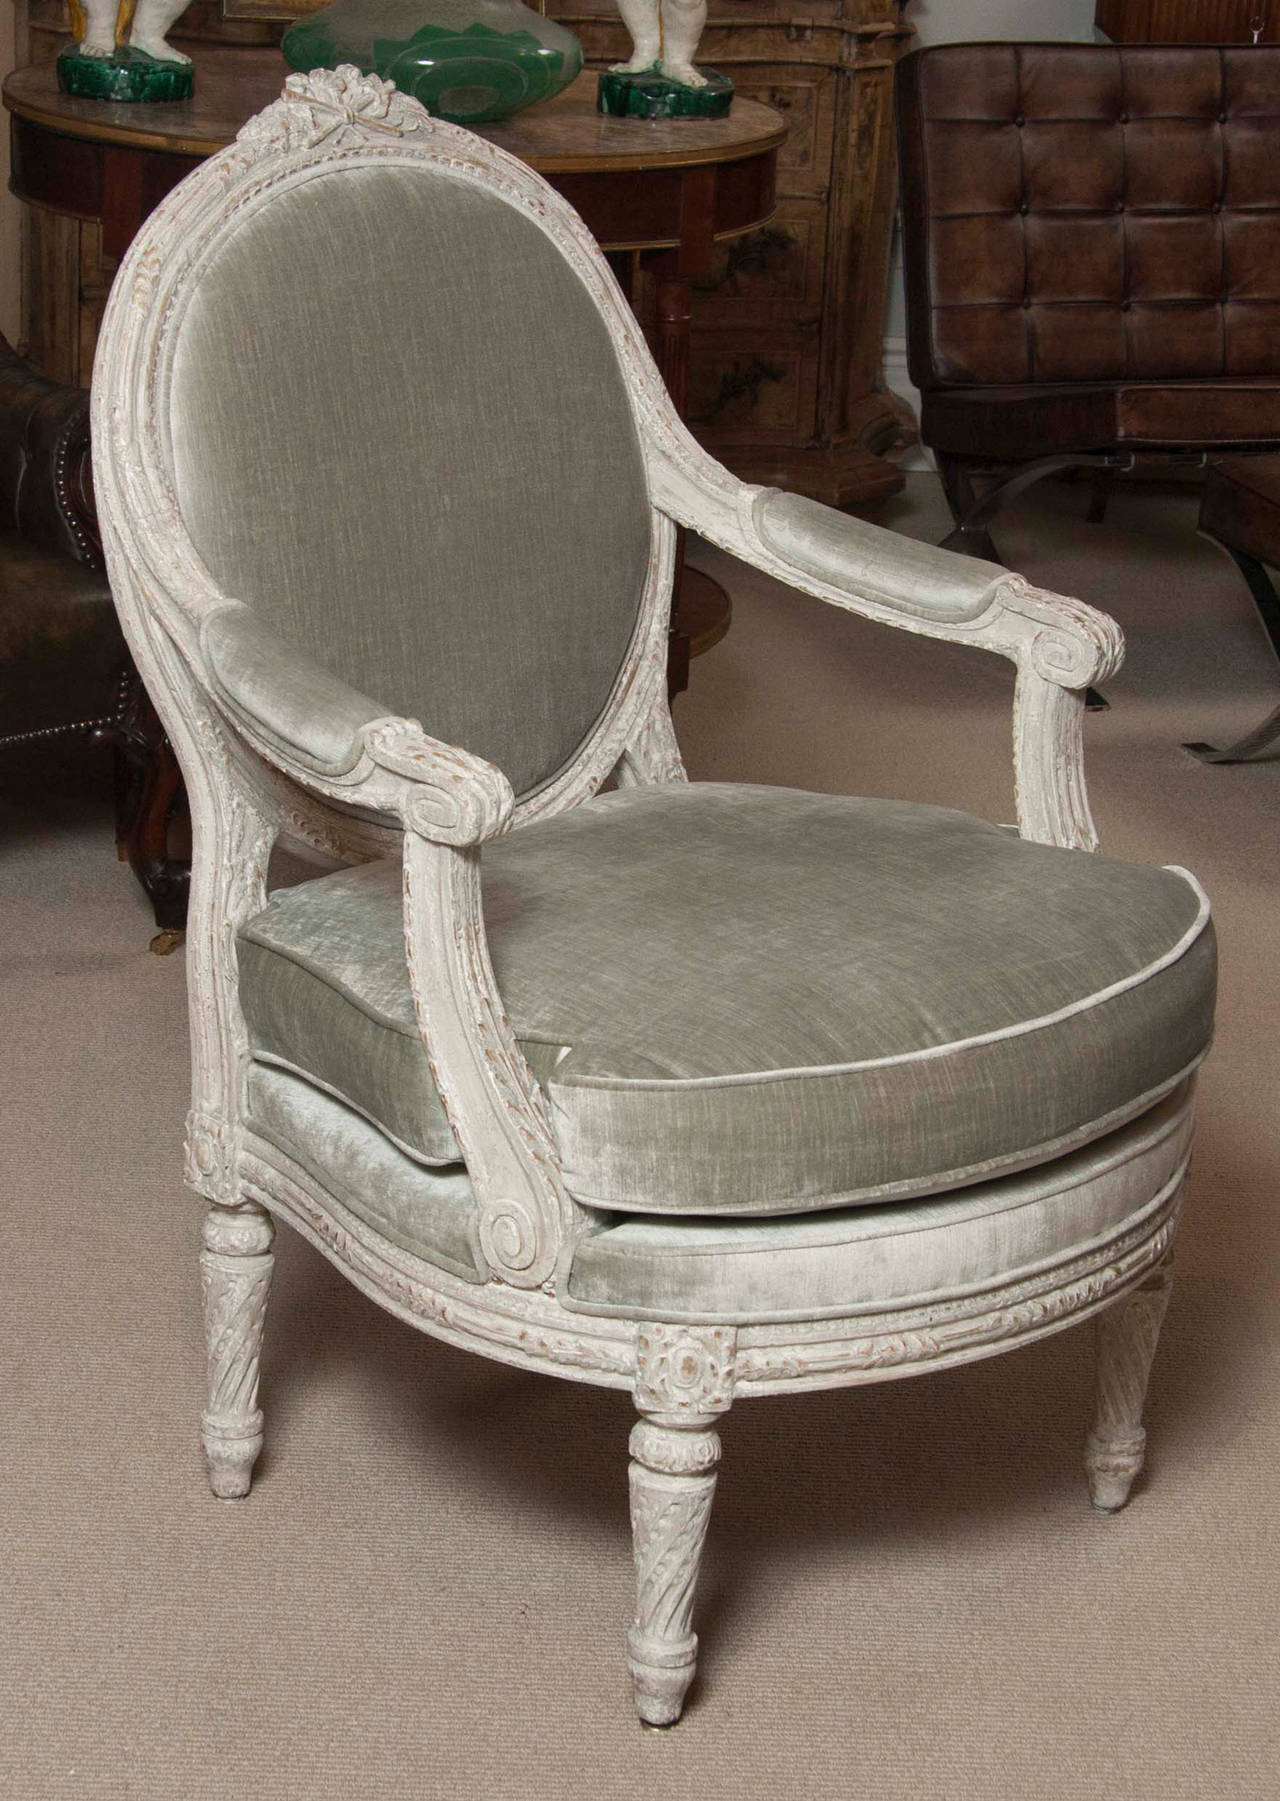 An impressive pair of Italian, late 18th century painted neoclassical armchairs from the piedmont region.